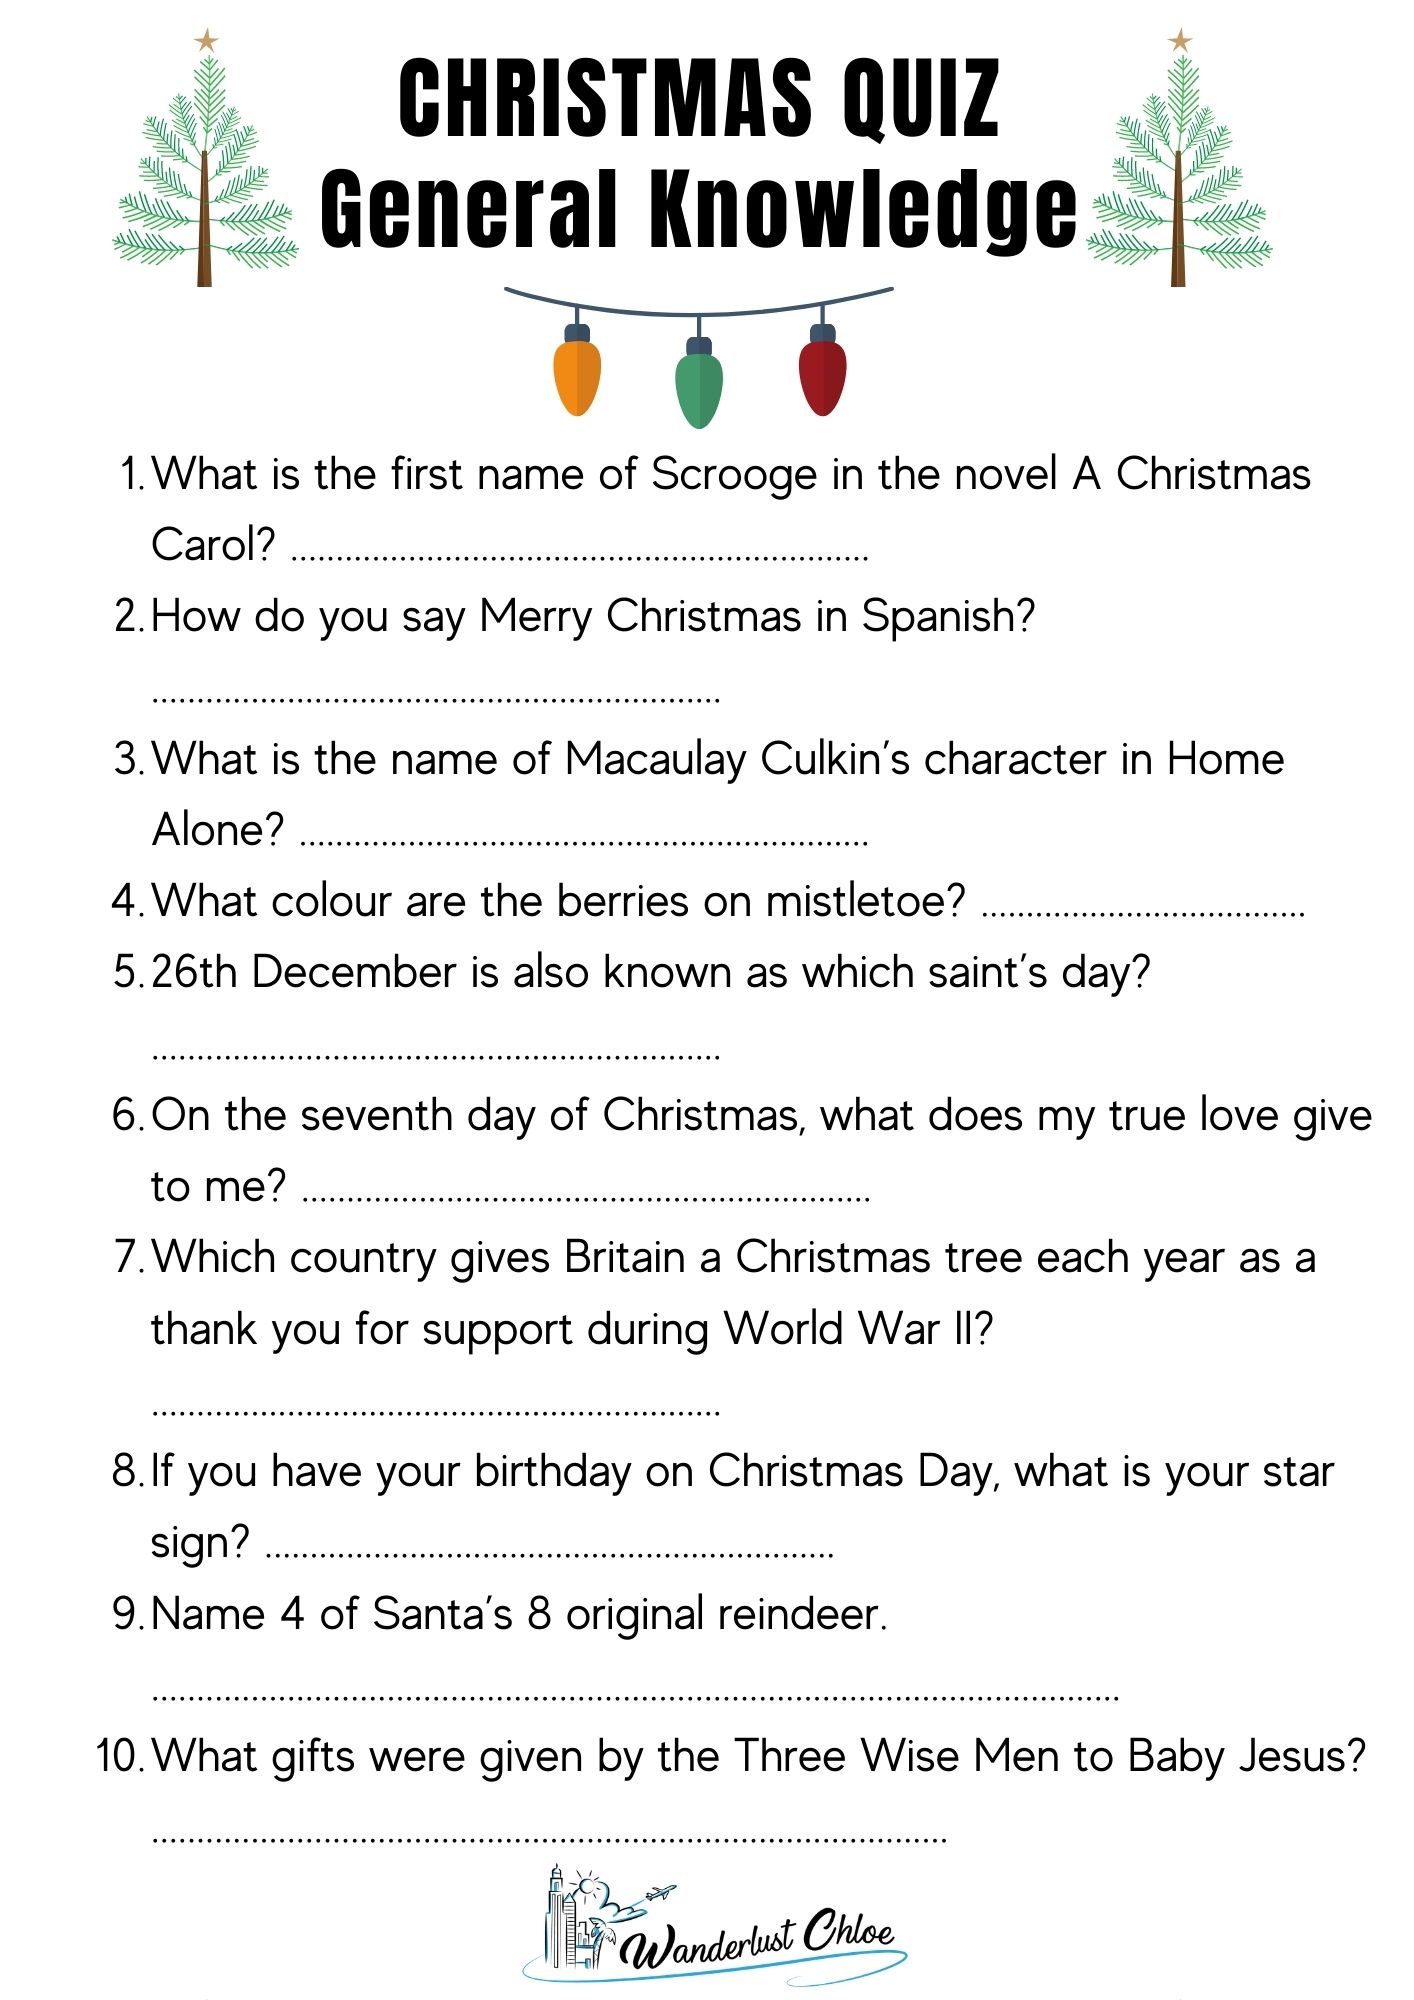 christmas-history-quiz-questions-and-answers-2021-merry-christmas-2021